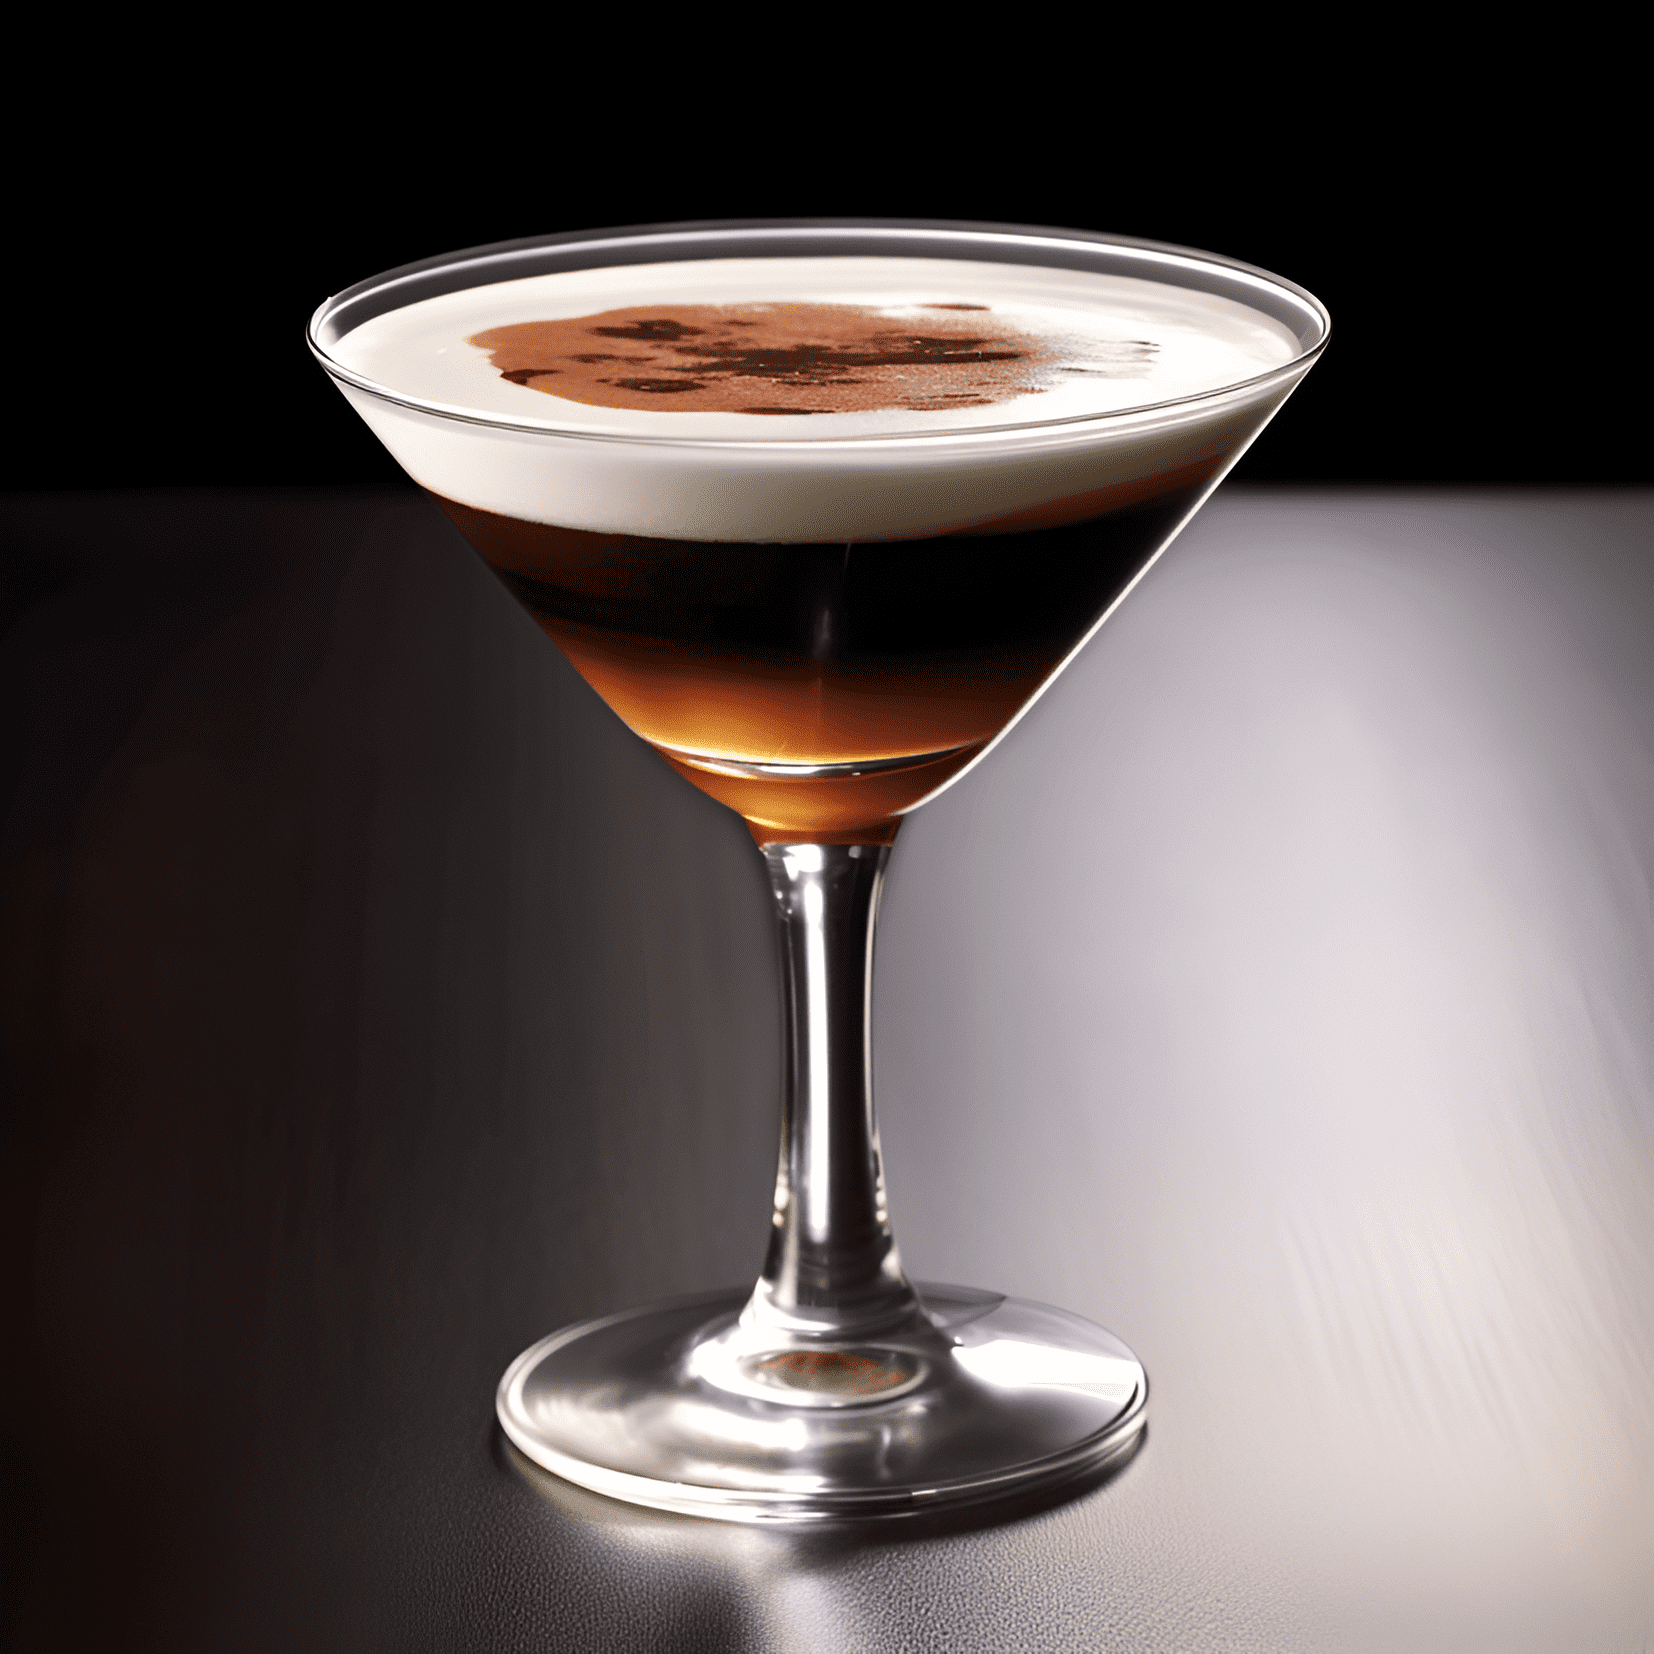 Tia Maria Cocktail Recipe - The Tia Maria cocktail has a rich, sweet, and slightly bitter taste, with strong coffee and chocolate notes. It is smooth and creamy, with a warming sensation from the alcohol.